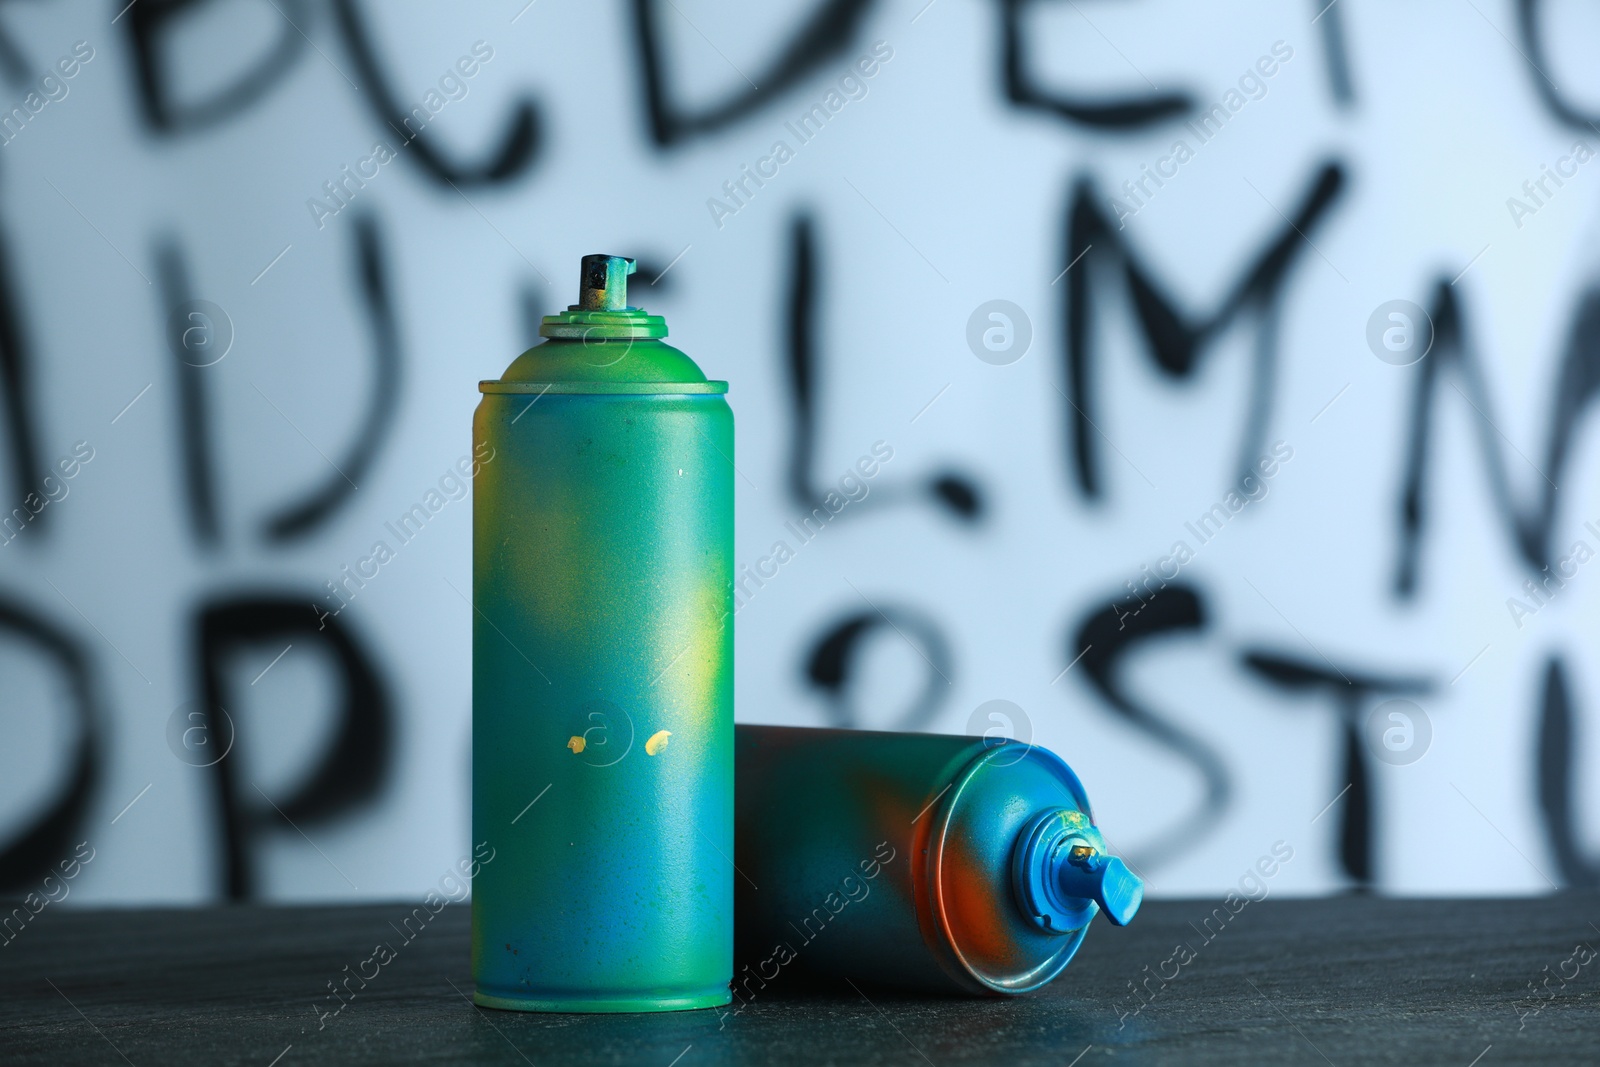 Photo of Two spray paint cans on black surface against white wall with different drawn symbols